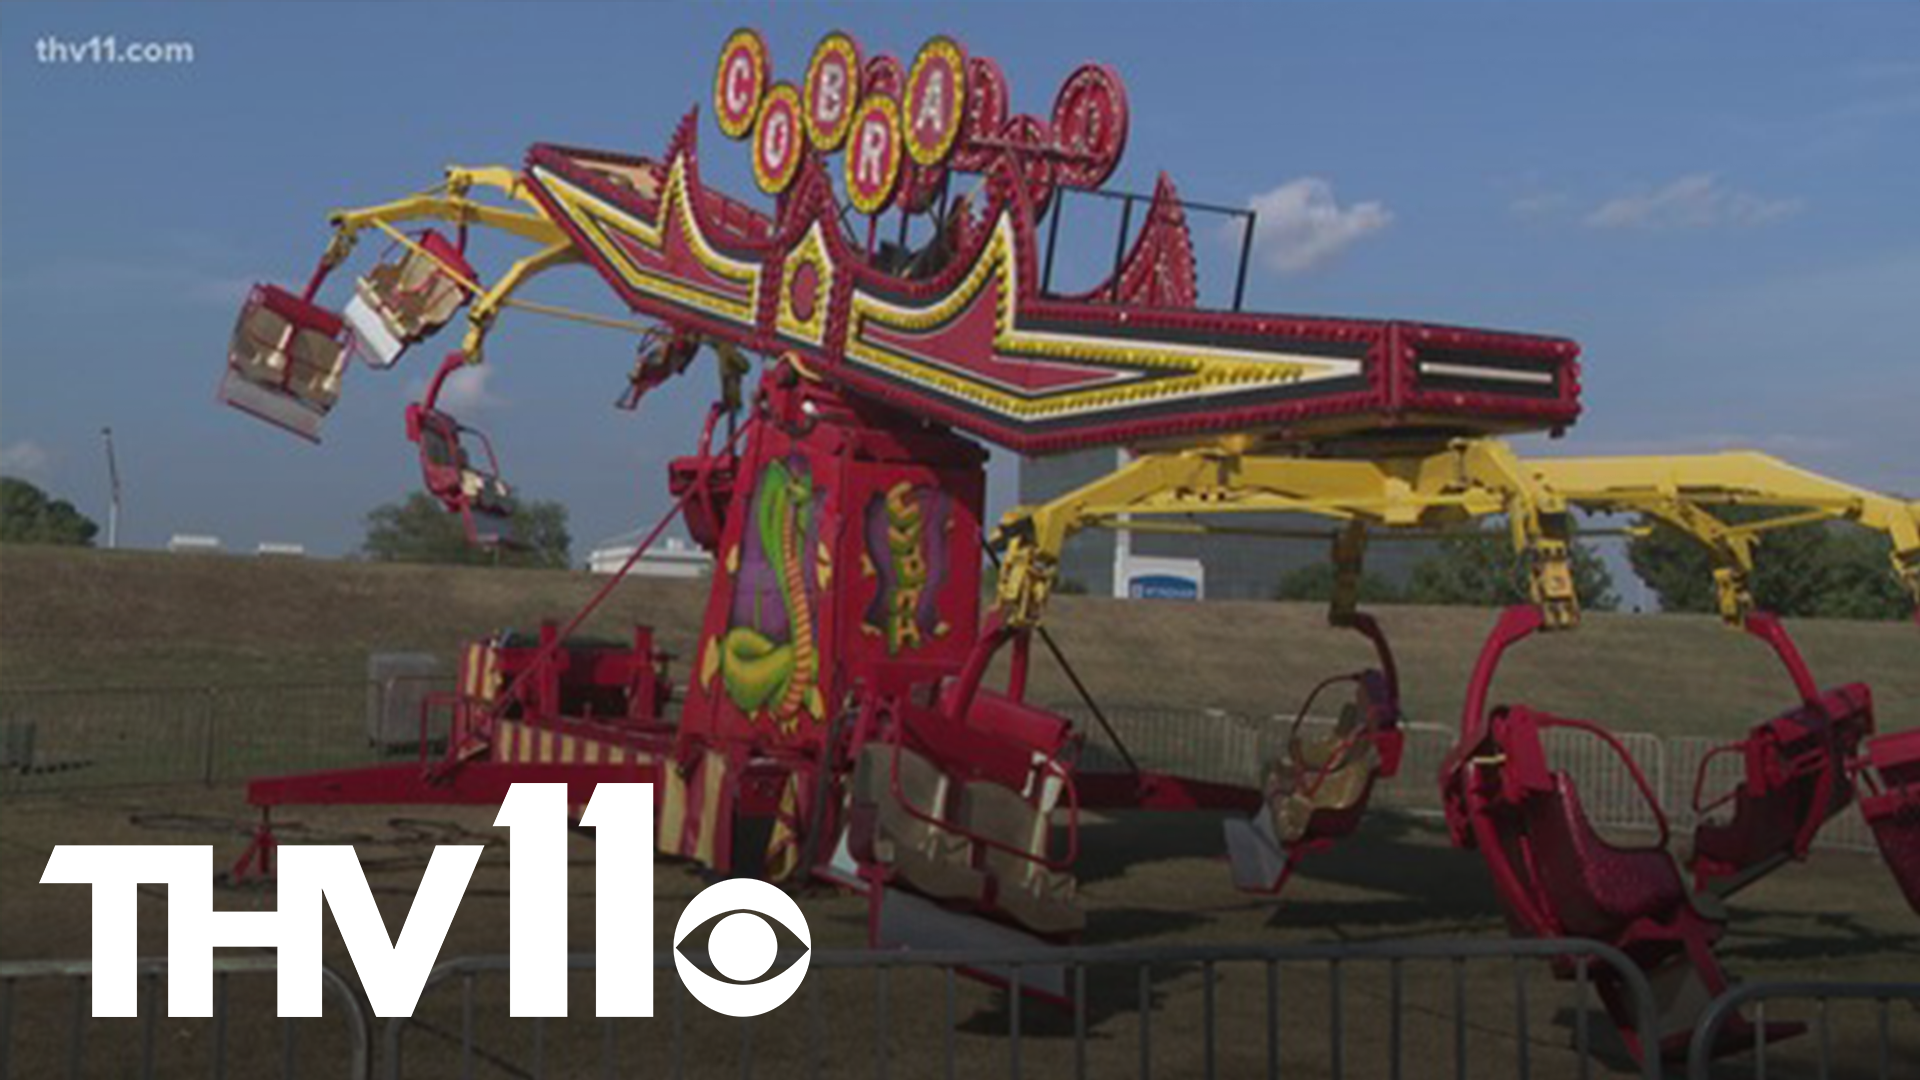 Today, the first ever Pulaski County fair kicks off in North Little Rock. Michael Aaron is live at Riverfront Park, where final preparations are underway.